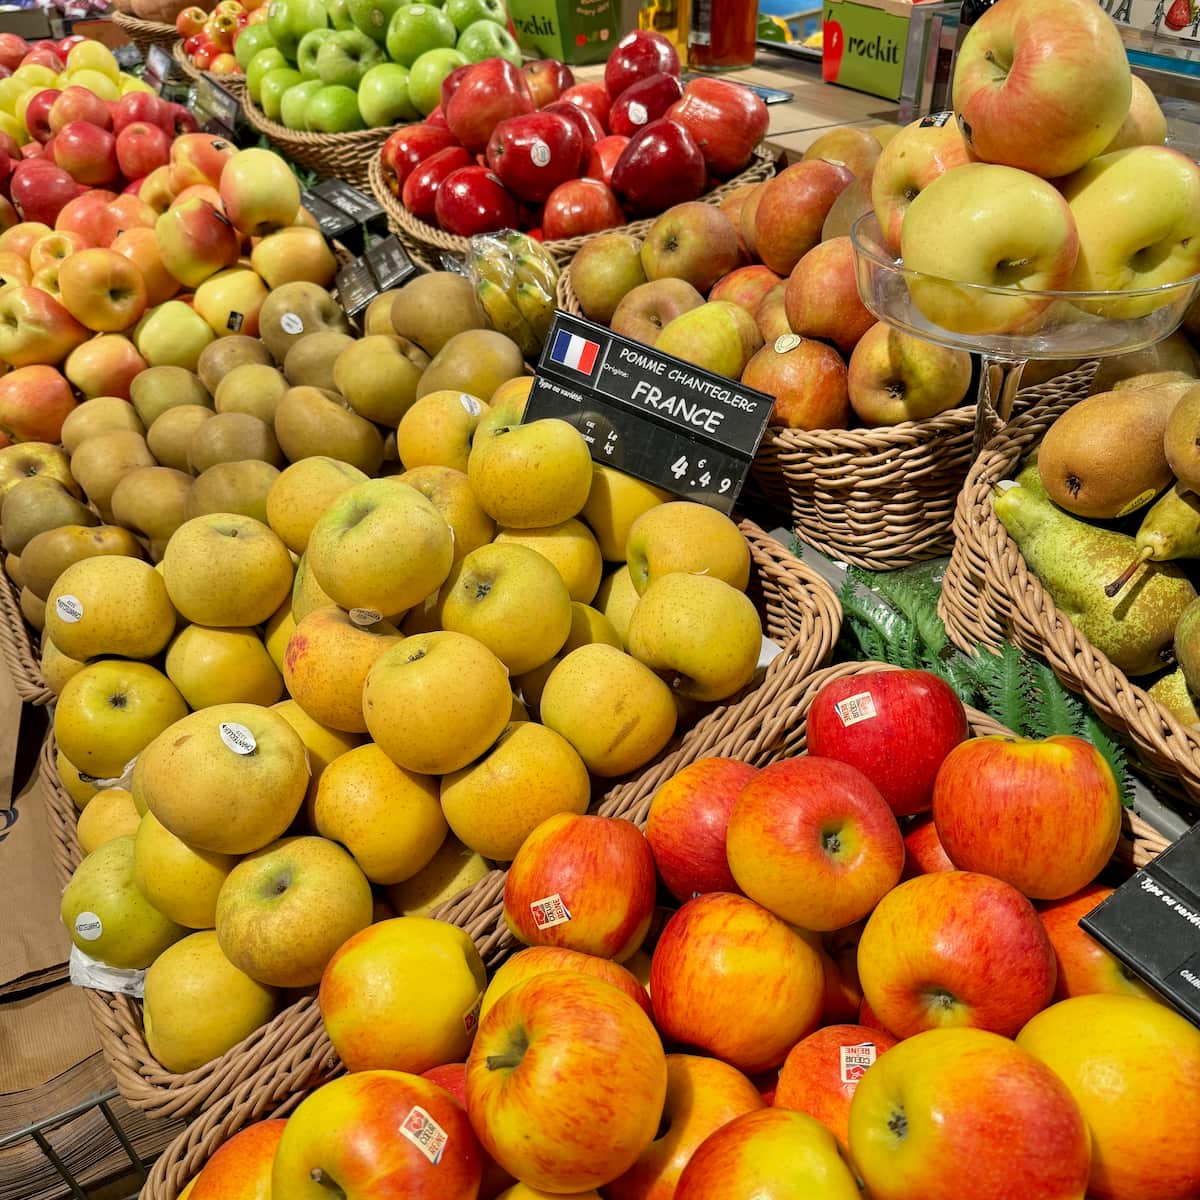 baskets of different varieties of apples in France